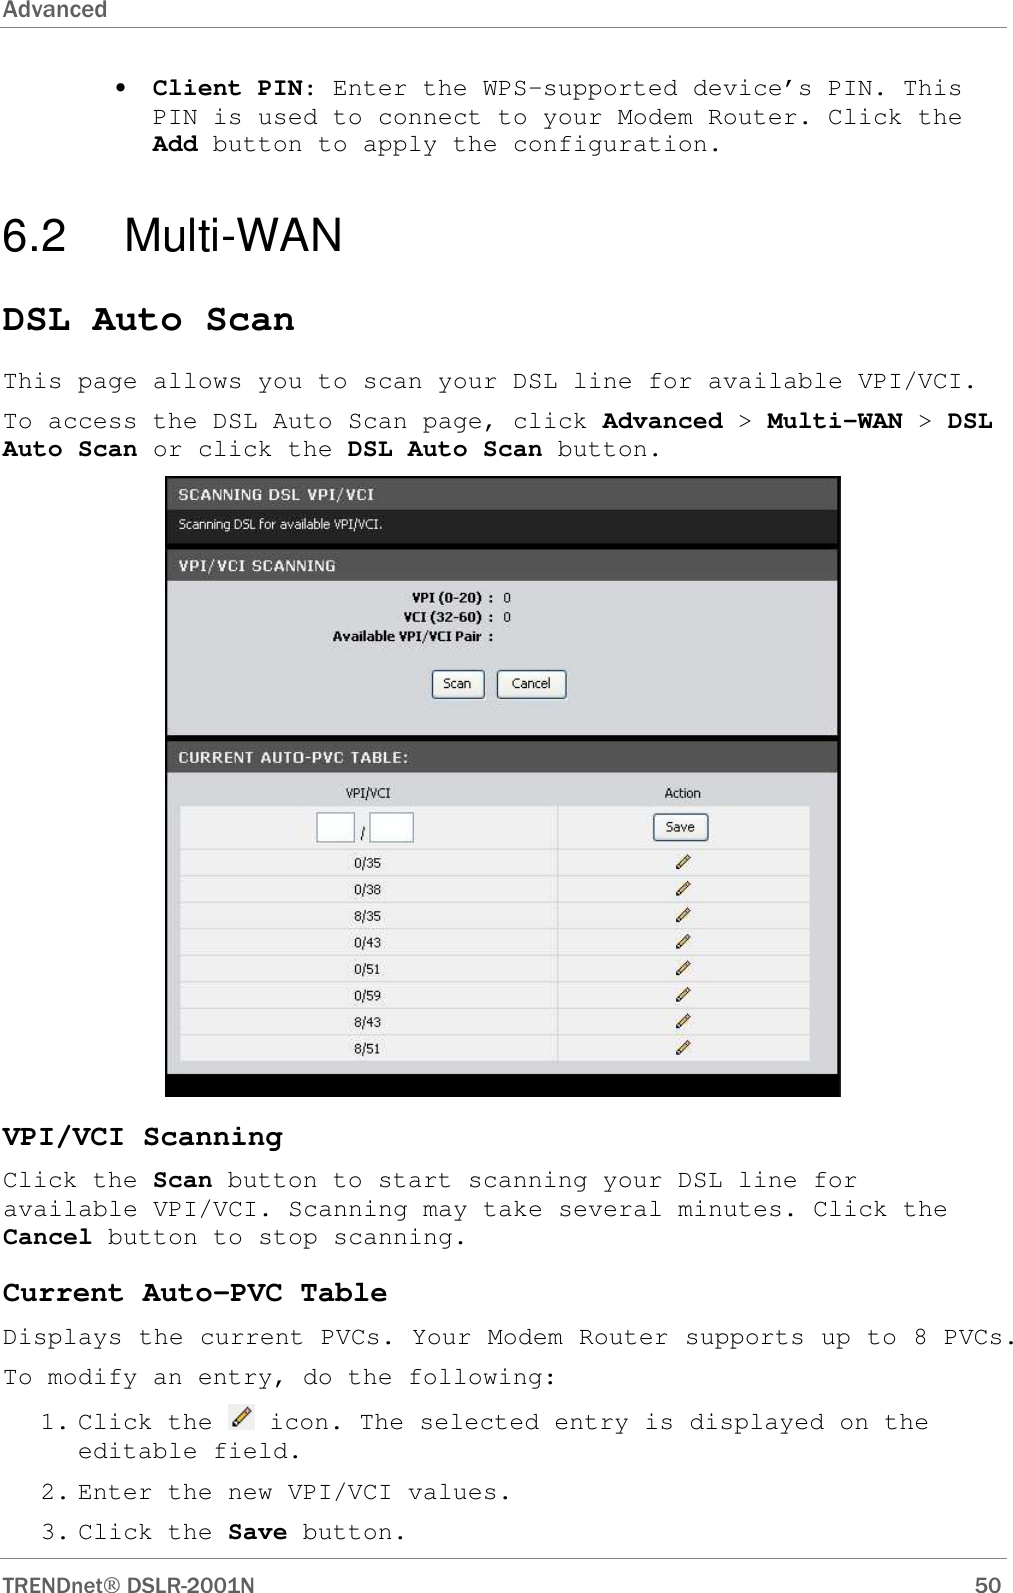 Advanced      TRENDnet DSLR-2001N        50 • Client PIN: Enter the WPS-supported device’s PIN. This PIN is used to connect to your Modem Router. Click the Add button to apply the configuration. 6.2   Multi-WAN DSL Auto Scan This page allows you to scan your DSL line for available VPI/VCI. To access the DSL Auto Scan page, click Advanced &gt; Multi-WAN &gt; DSL Auto Scan or click the DSL Auto Scan button.  VPI/VCI Scanning Click the Scan button to start scanning your DSL line for available VPI/VCI. Scanning may take several minutes. Click the Cancel button to stop scanning. Current Auto-PVC Table Displays the current PVCs. Your Modem Router supports up to 8 PVCs. To modify an entry, do the following: 1. Click the   icon. The selected entry is displayed on the editable field.  2. Enter the new VPI/VCI values. 3. Click the Save button.  